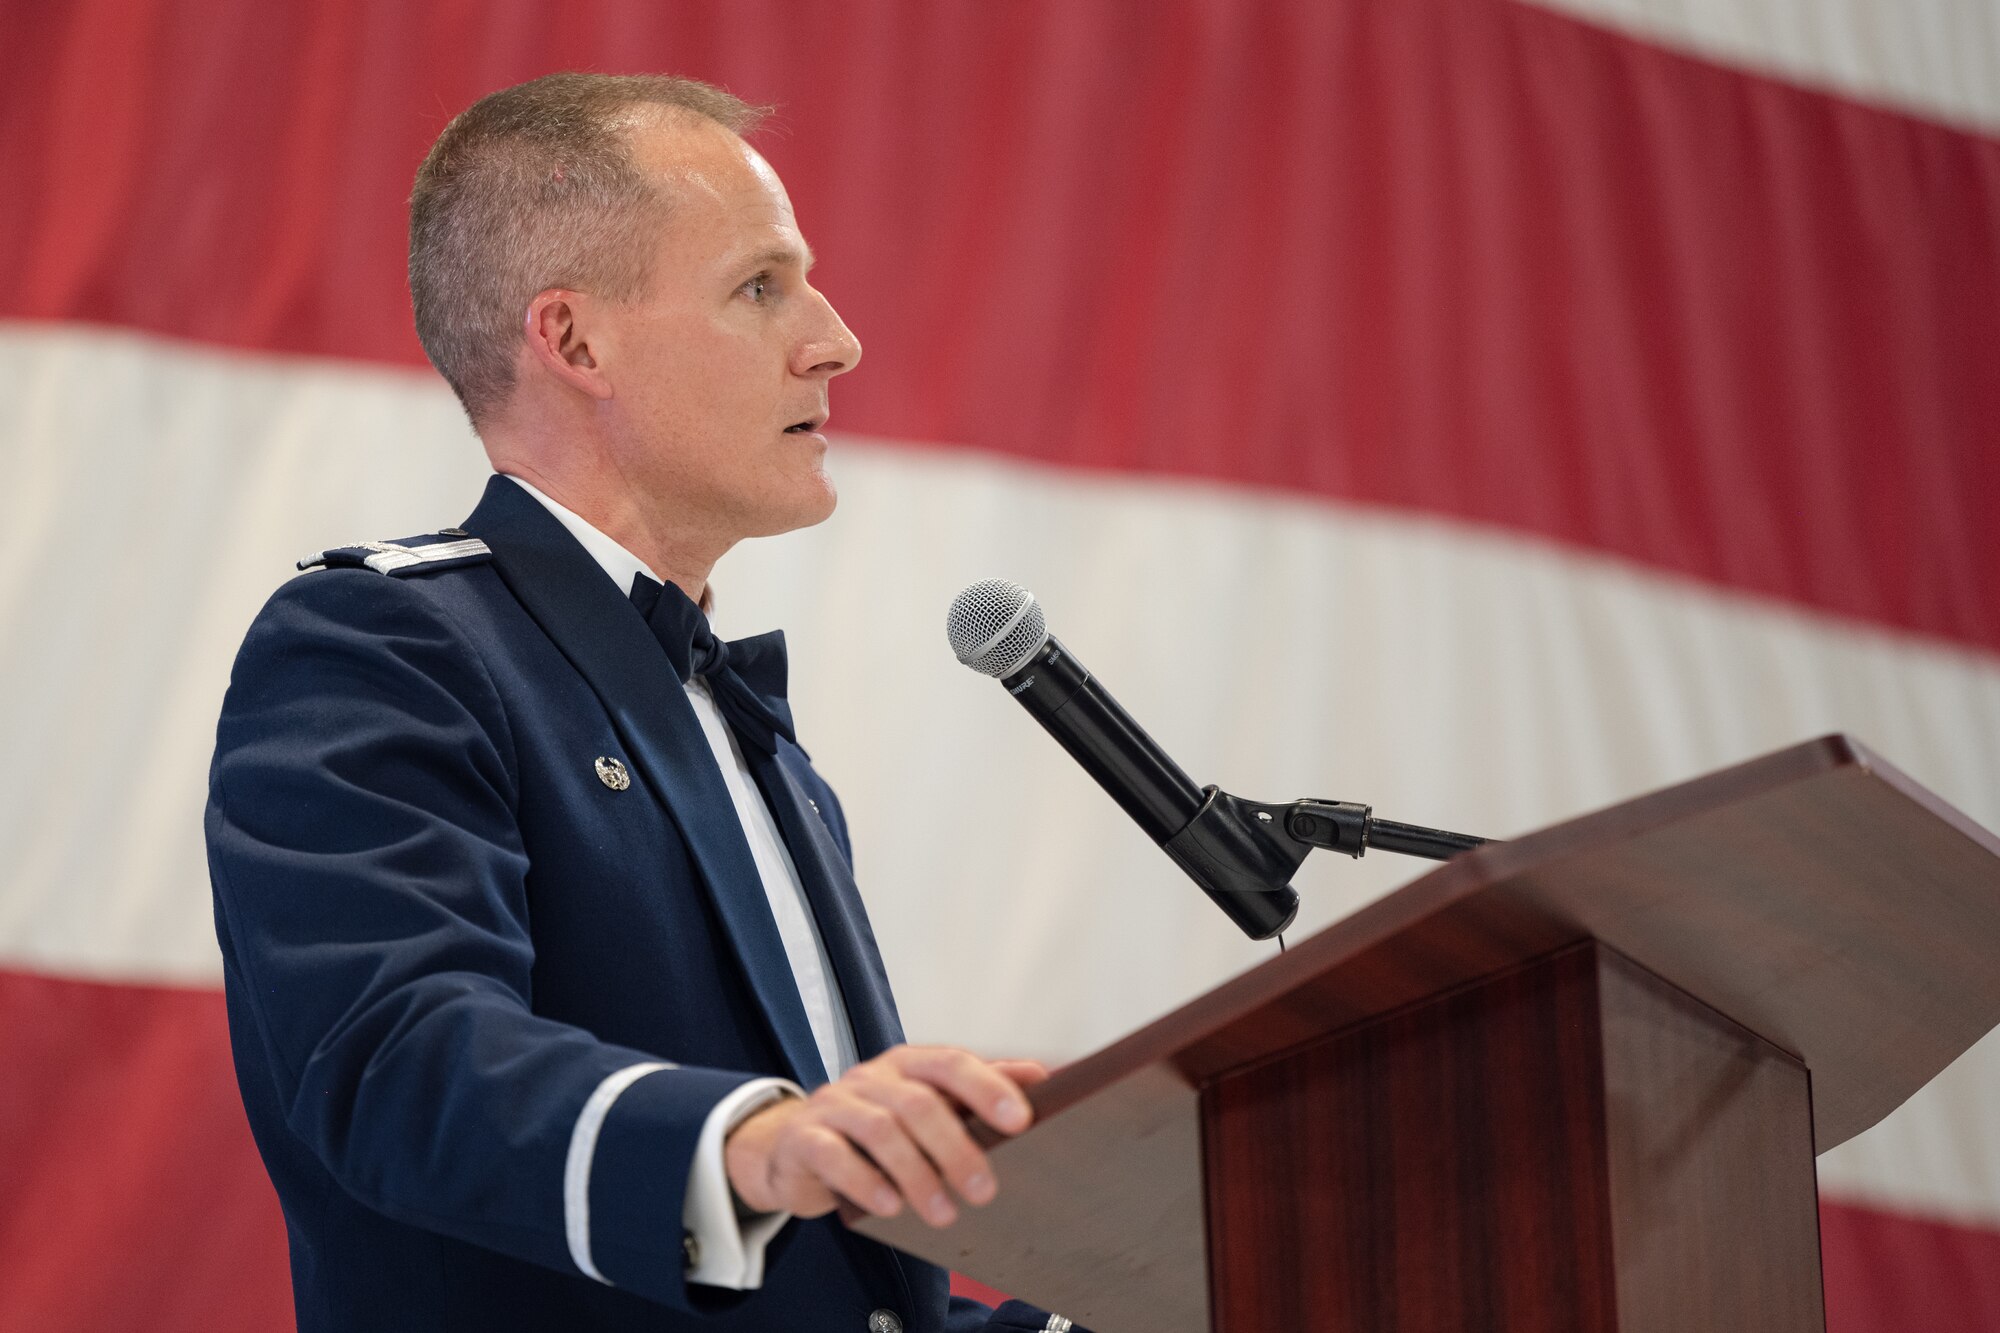 U.S. Air Force Col. Justin Spears, 49th Wing commander, gives remarks during the 2023 Holloman Air Force Ball at Holloman Air Force Base, New Mexico, Sept. 23, 2023. The Air Force Ball is an annual event held at Air Force bases around the globe, bringing service members and their loved ones together to celebrate the service’s legacy. (U.S. Air Force photo by Senior Airman Antonio Salfran)